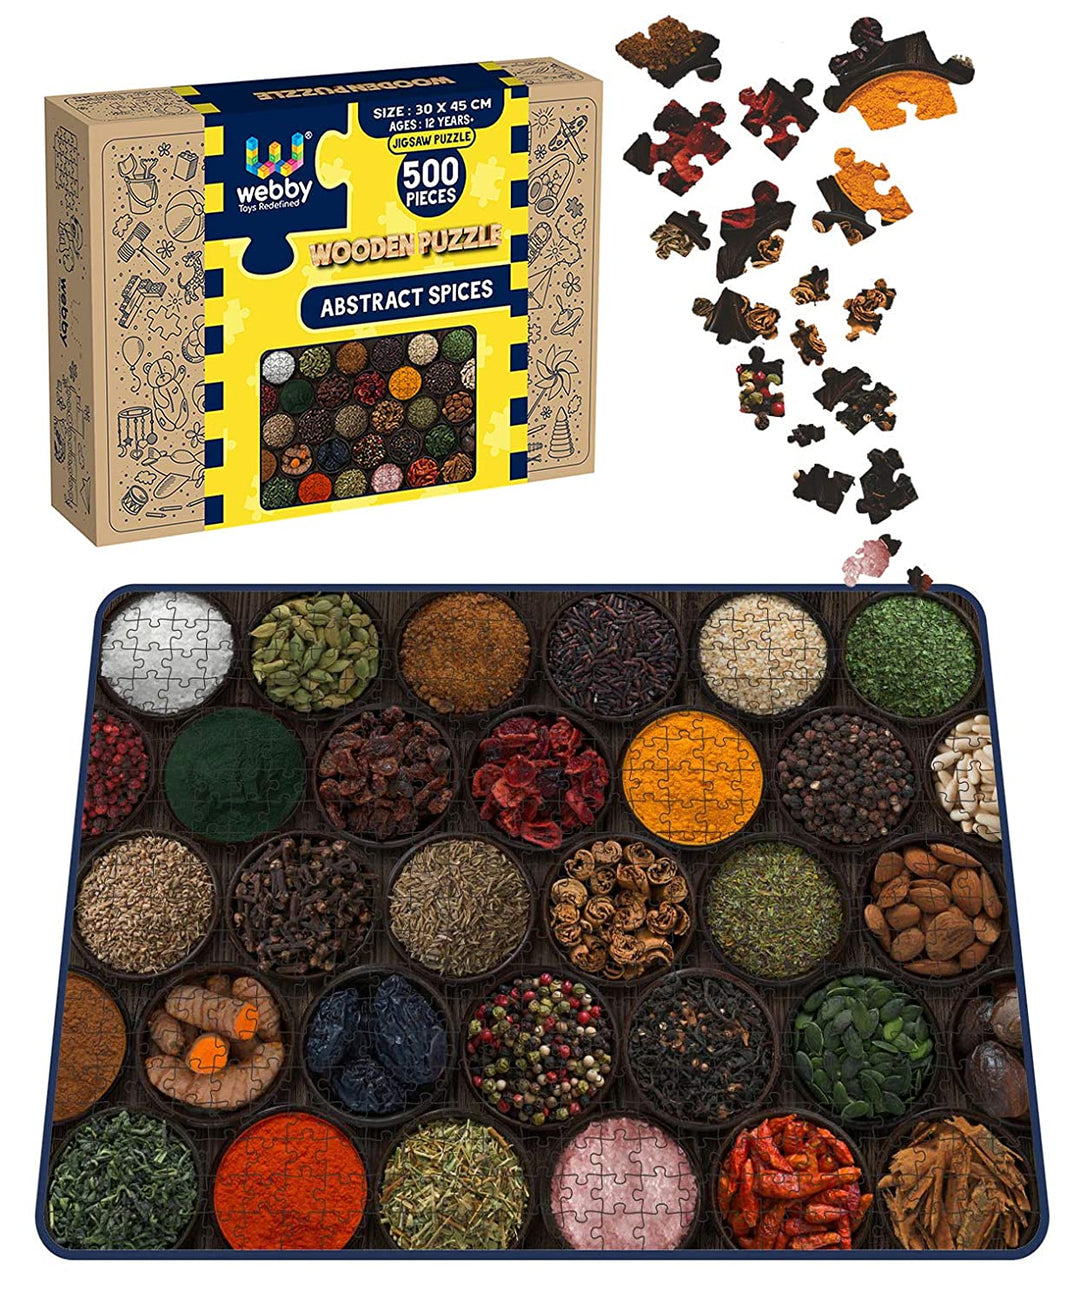 Webby Abstract Spices Wooden Jigsaw Puzzle, 500 pieces